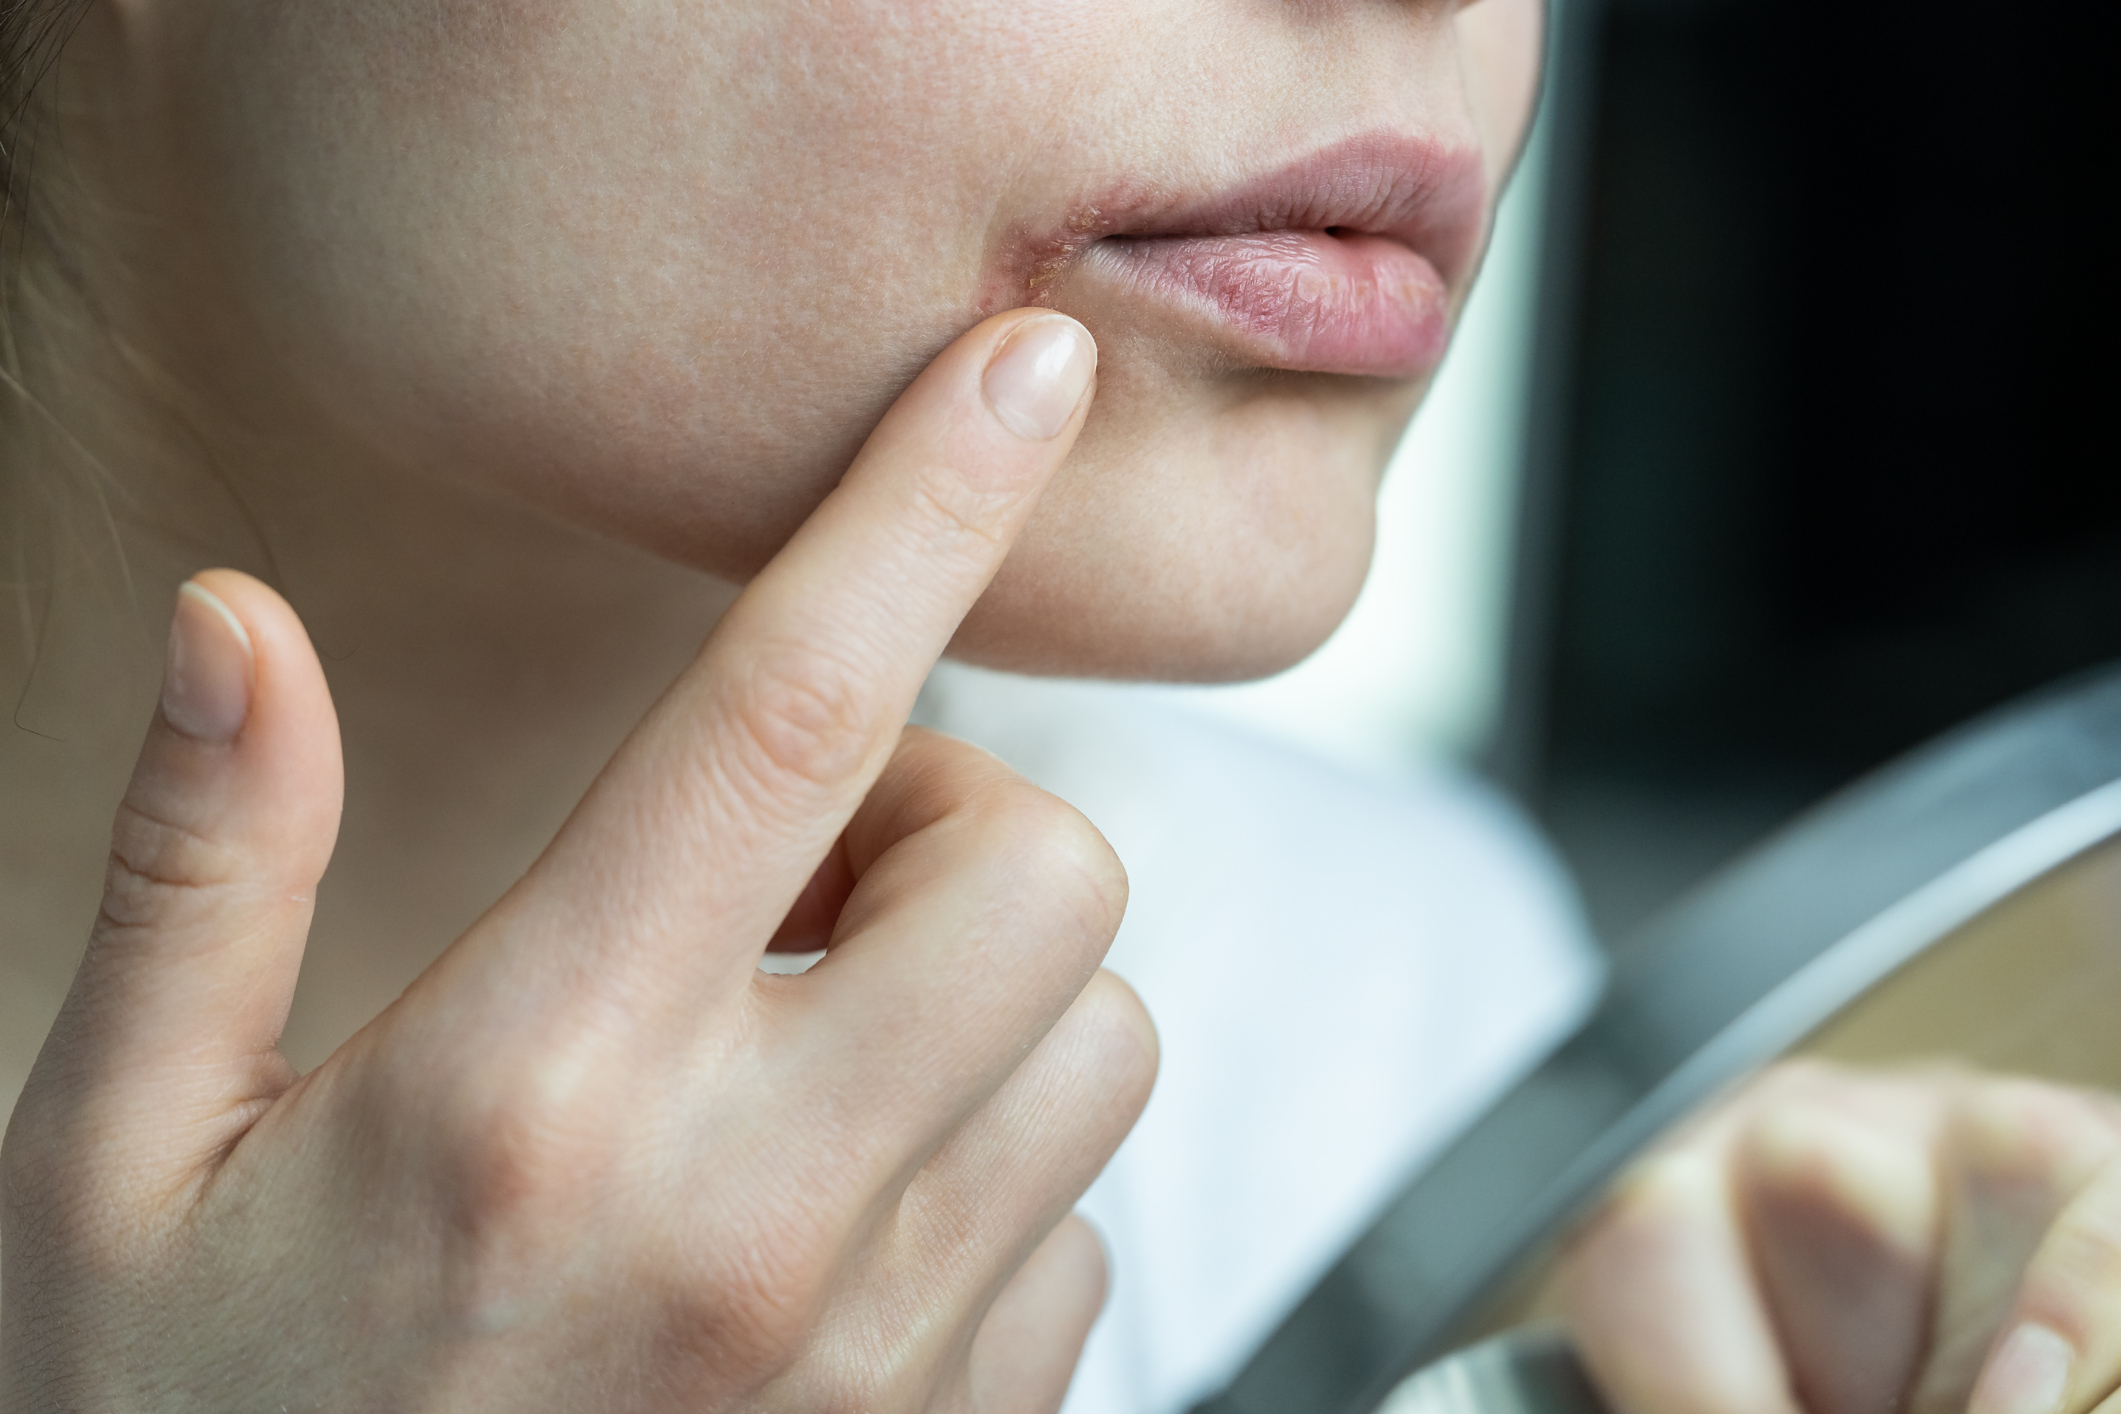 Pimple On Your Lip? Here's How To Treat It Without Popping